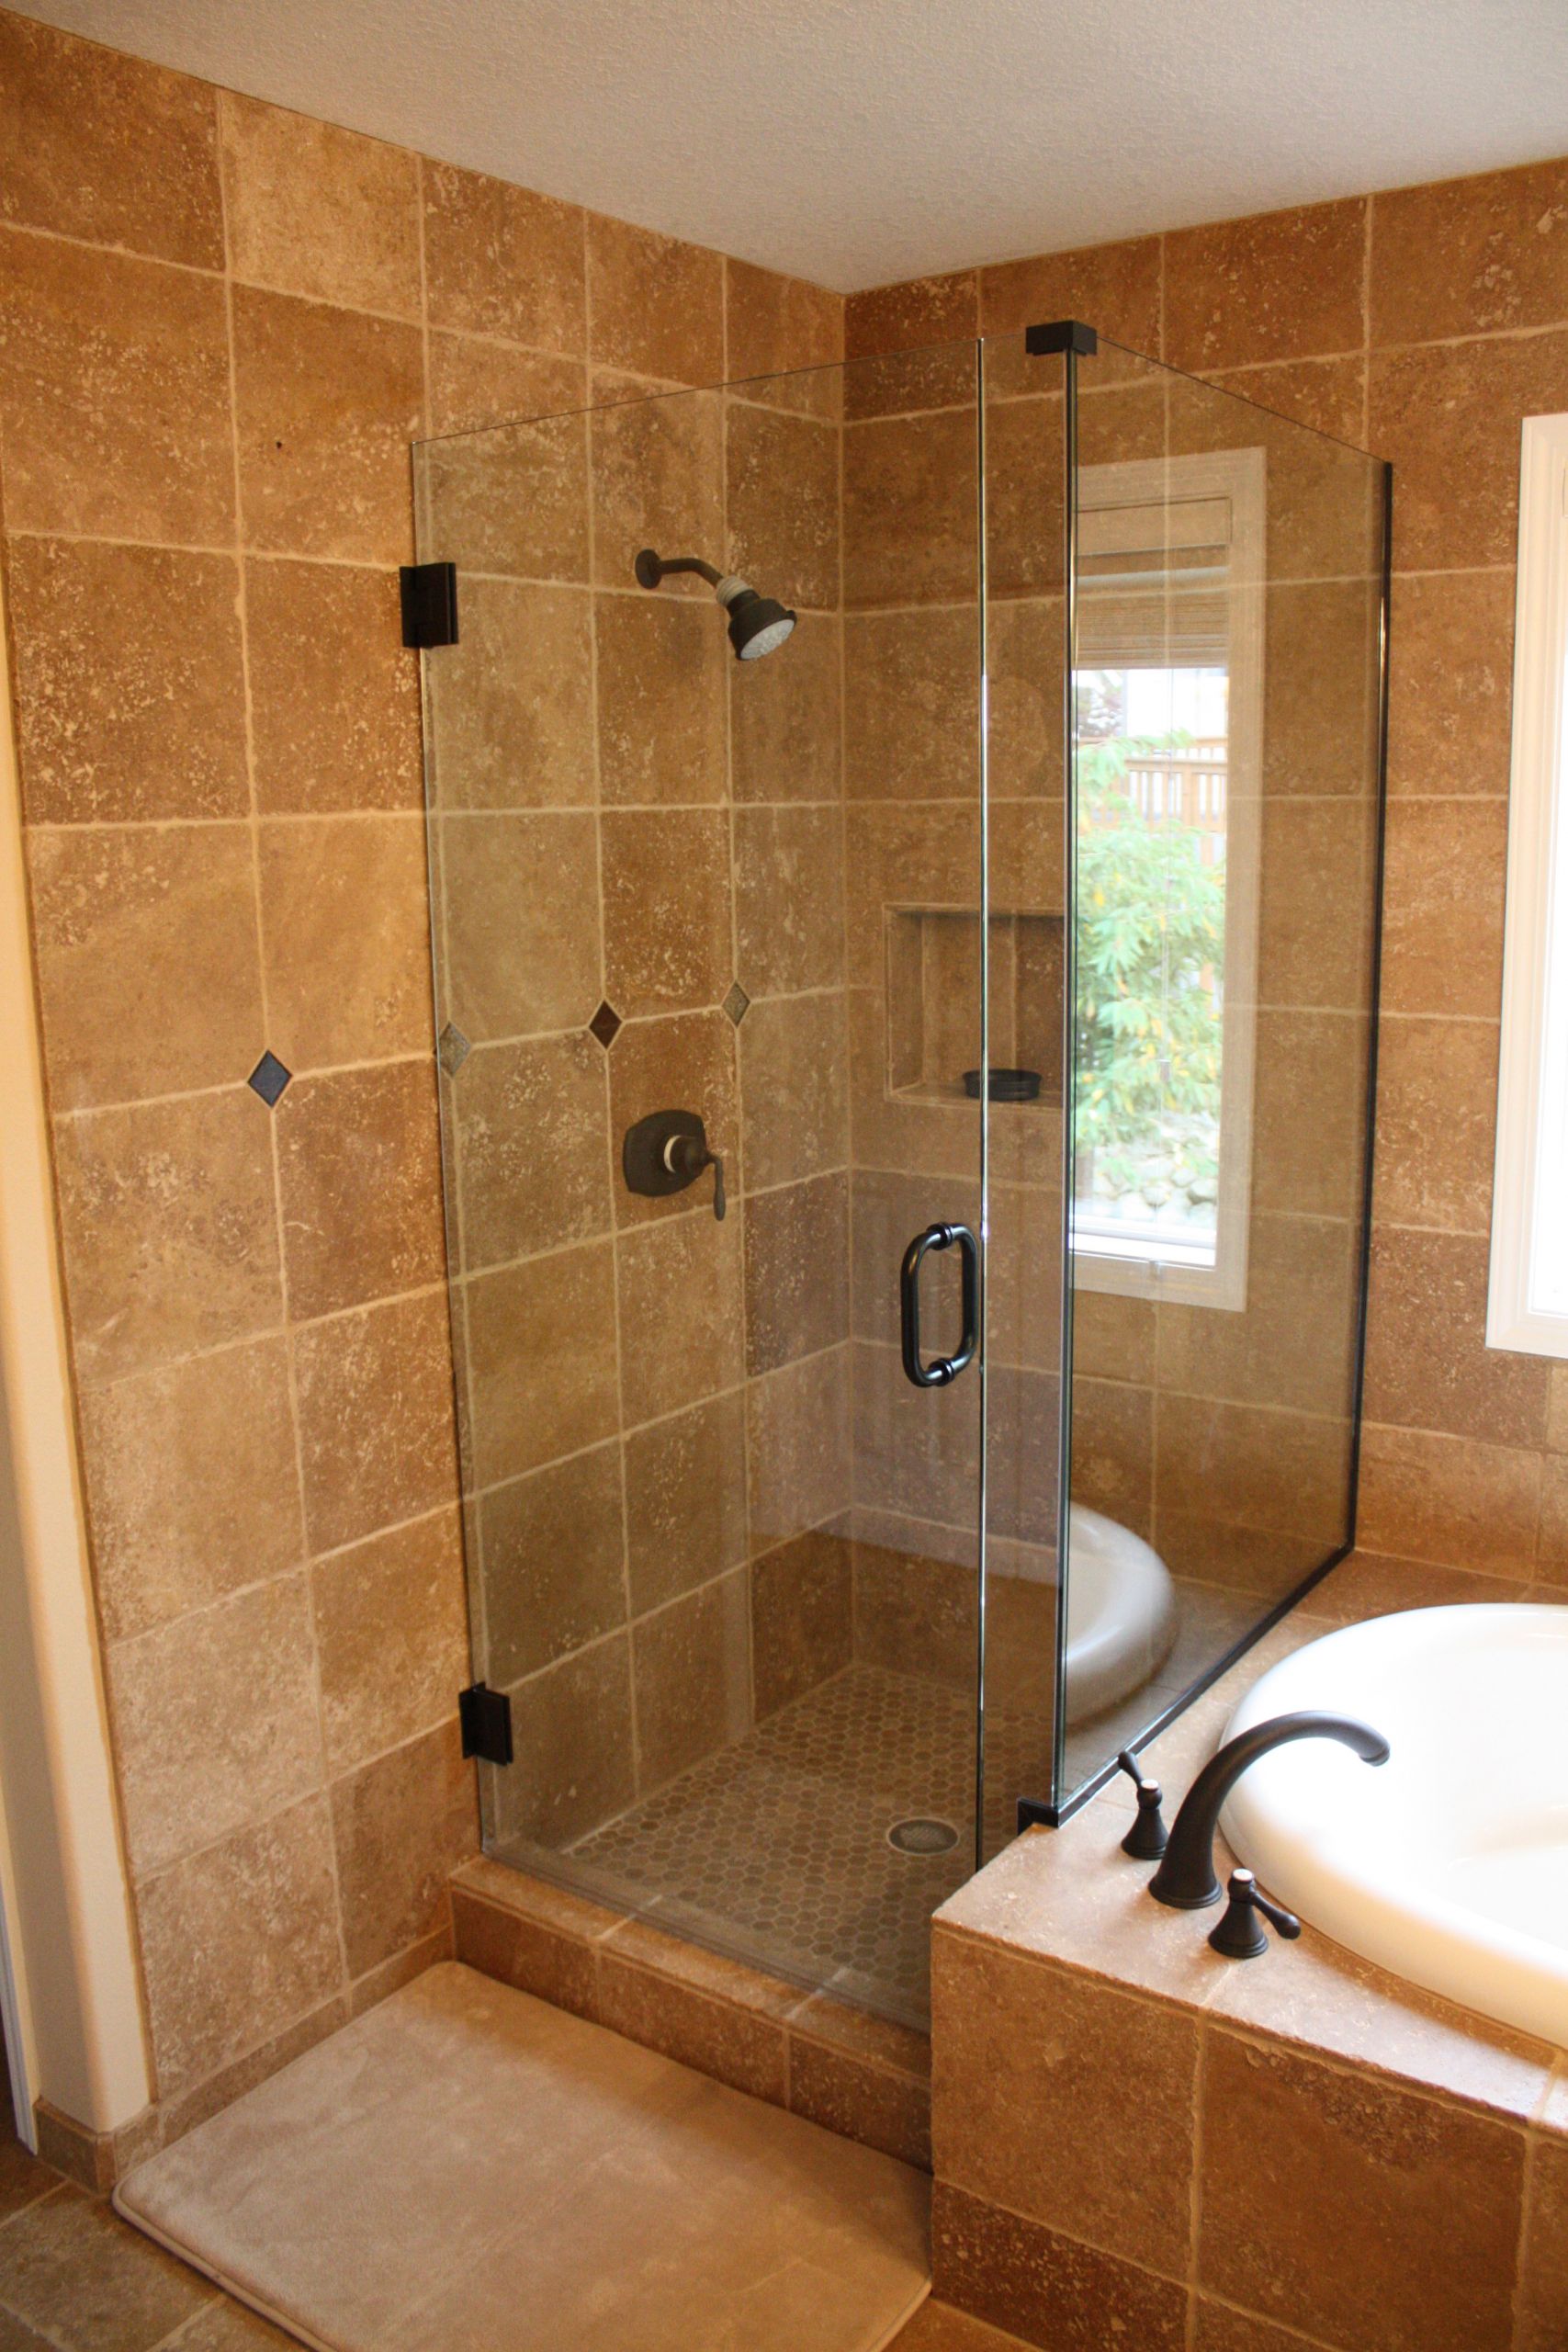 Bathroom Shower Tiles Ideas
 31 cool ideas and pictures of natural stone bathroom